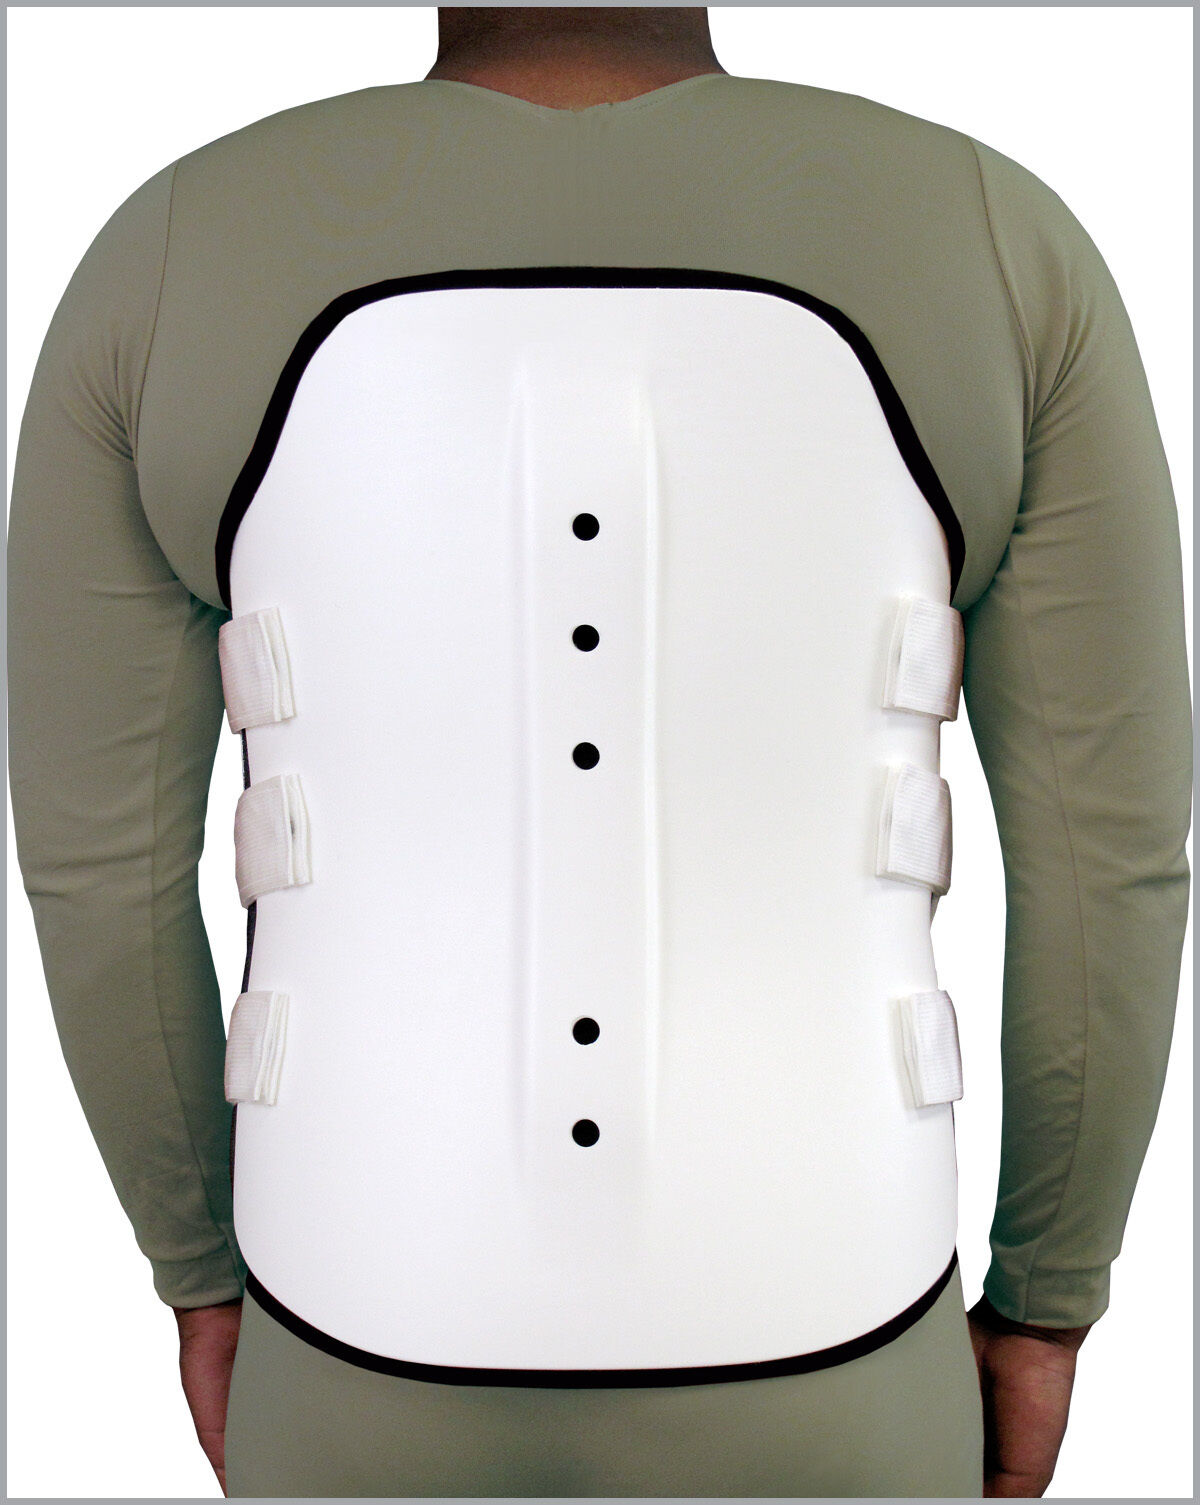 TLSO Torso Back Brace Support Clamshell Hard Plastic Wrap Around